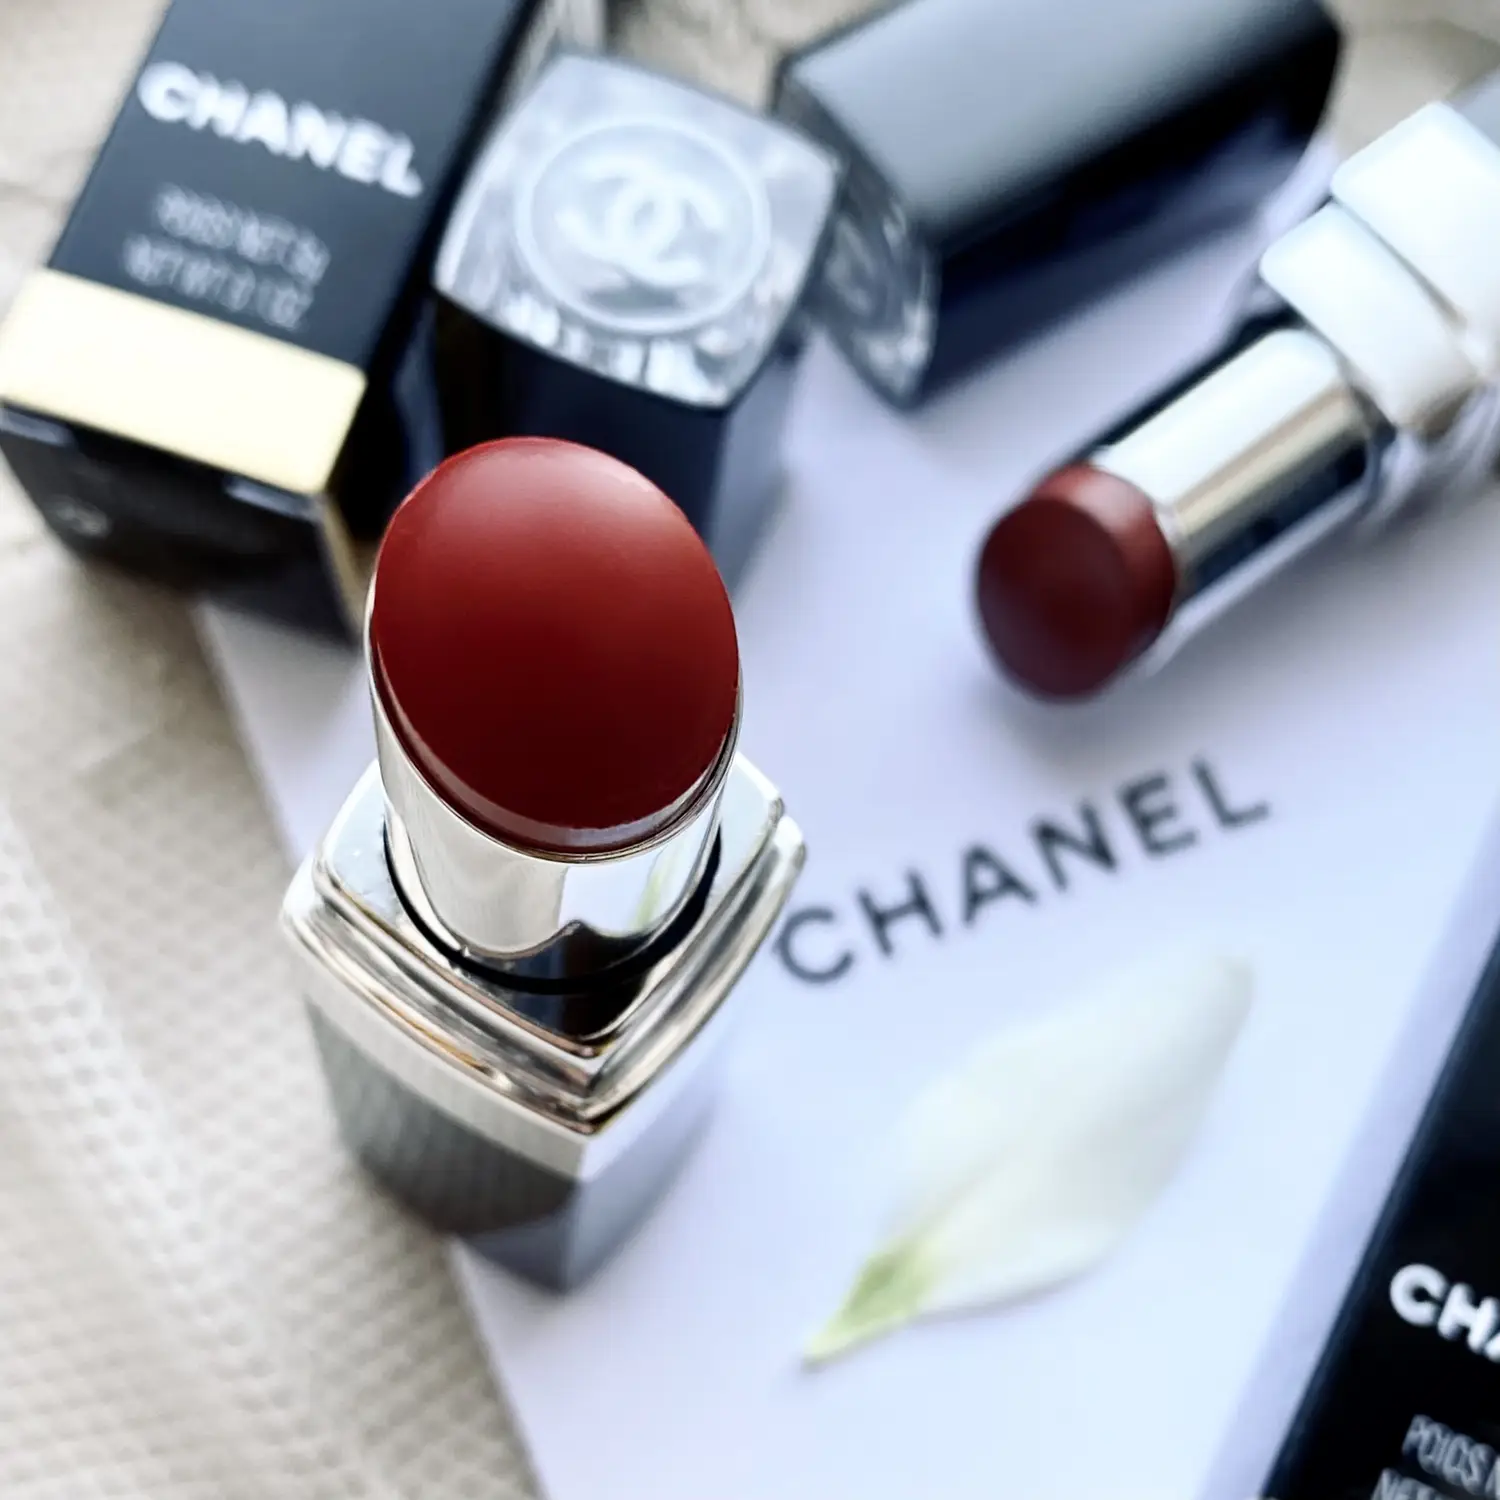 CHANEL, Makeup, Final Price Chanel Bourgeoisie Lipgloss 19 New